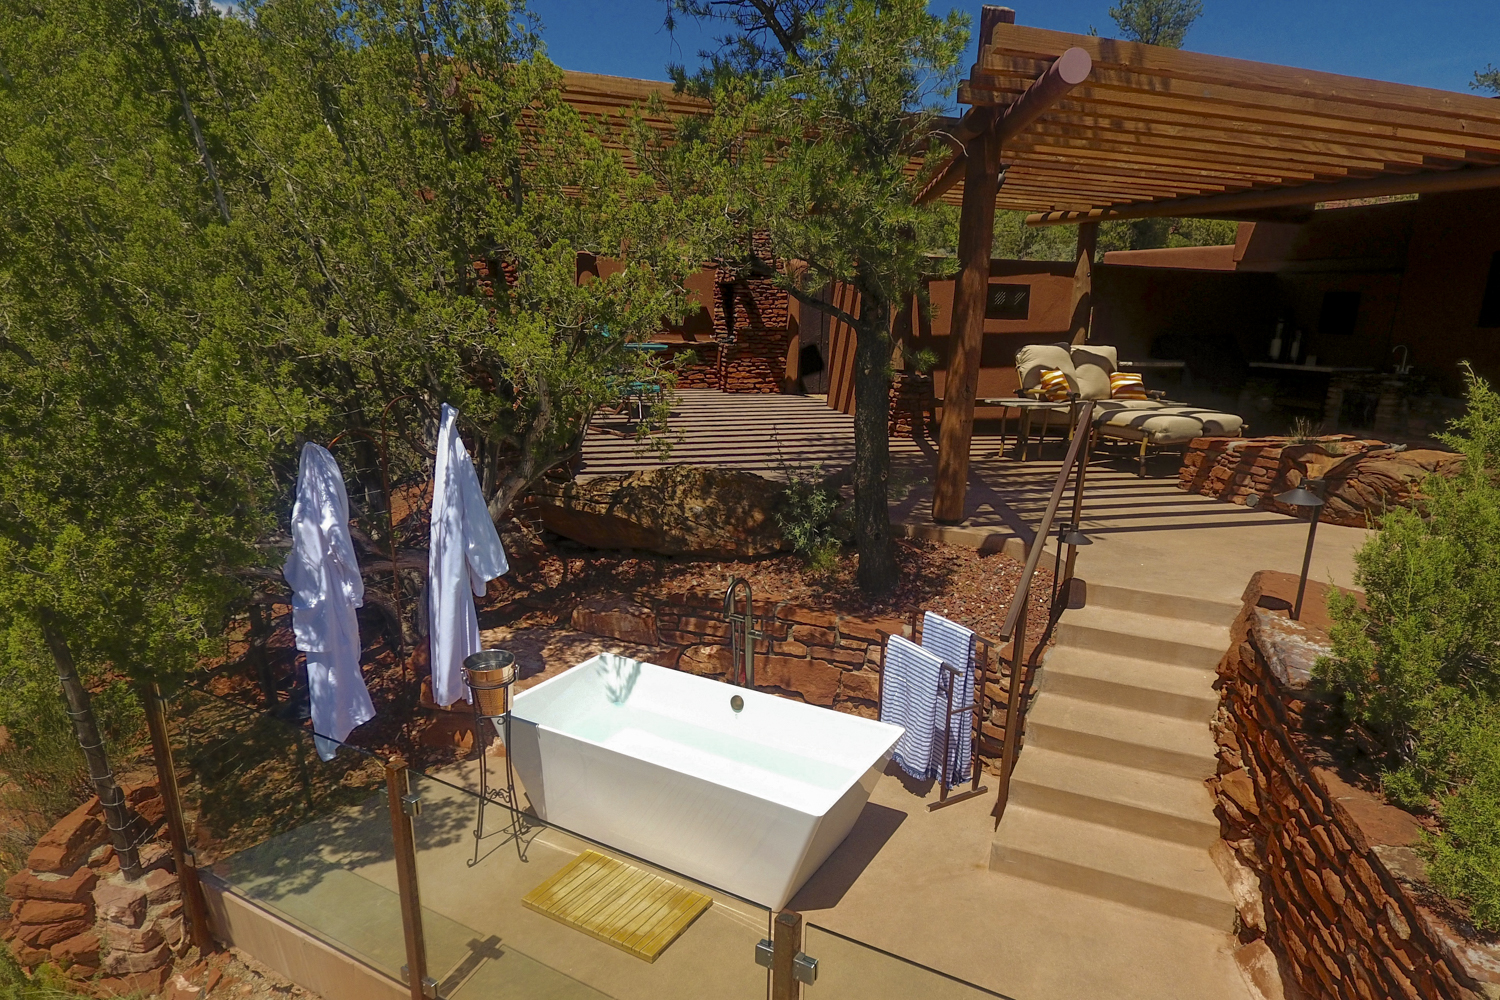 this luxury sedona vacation rental is like a personal resort for two dcim100mediadji 0071 jpg